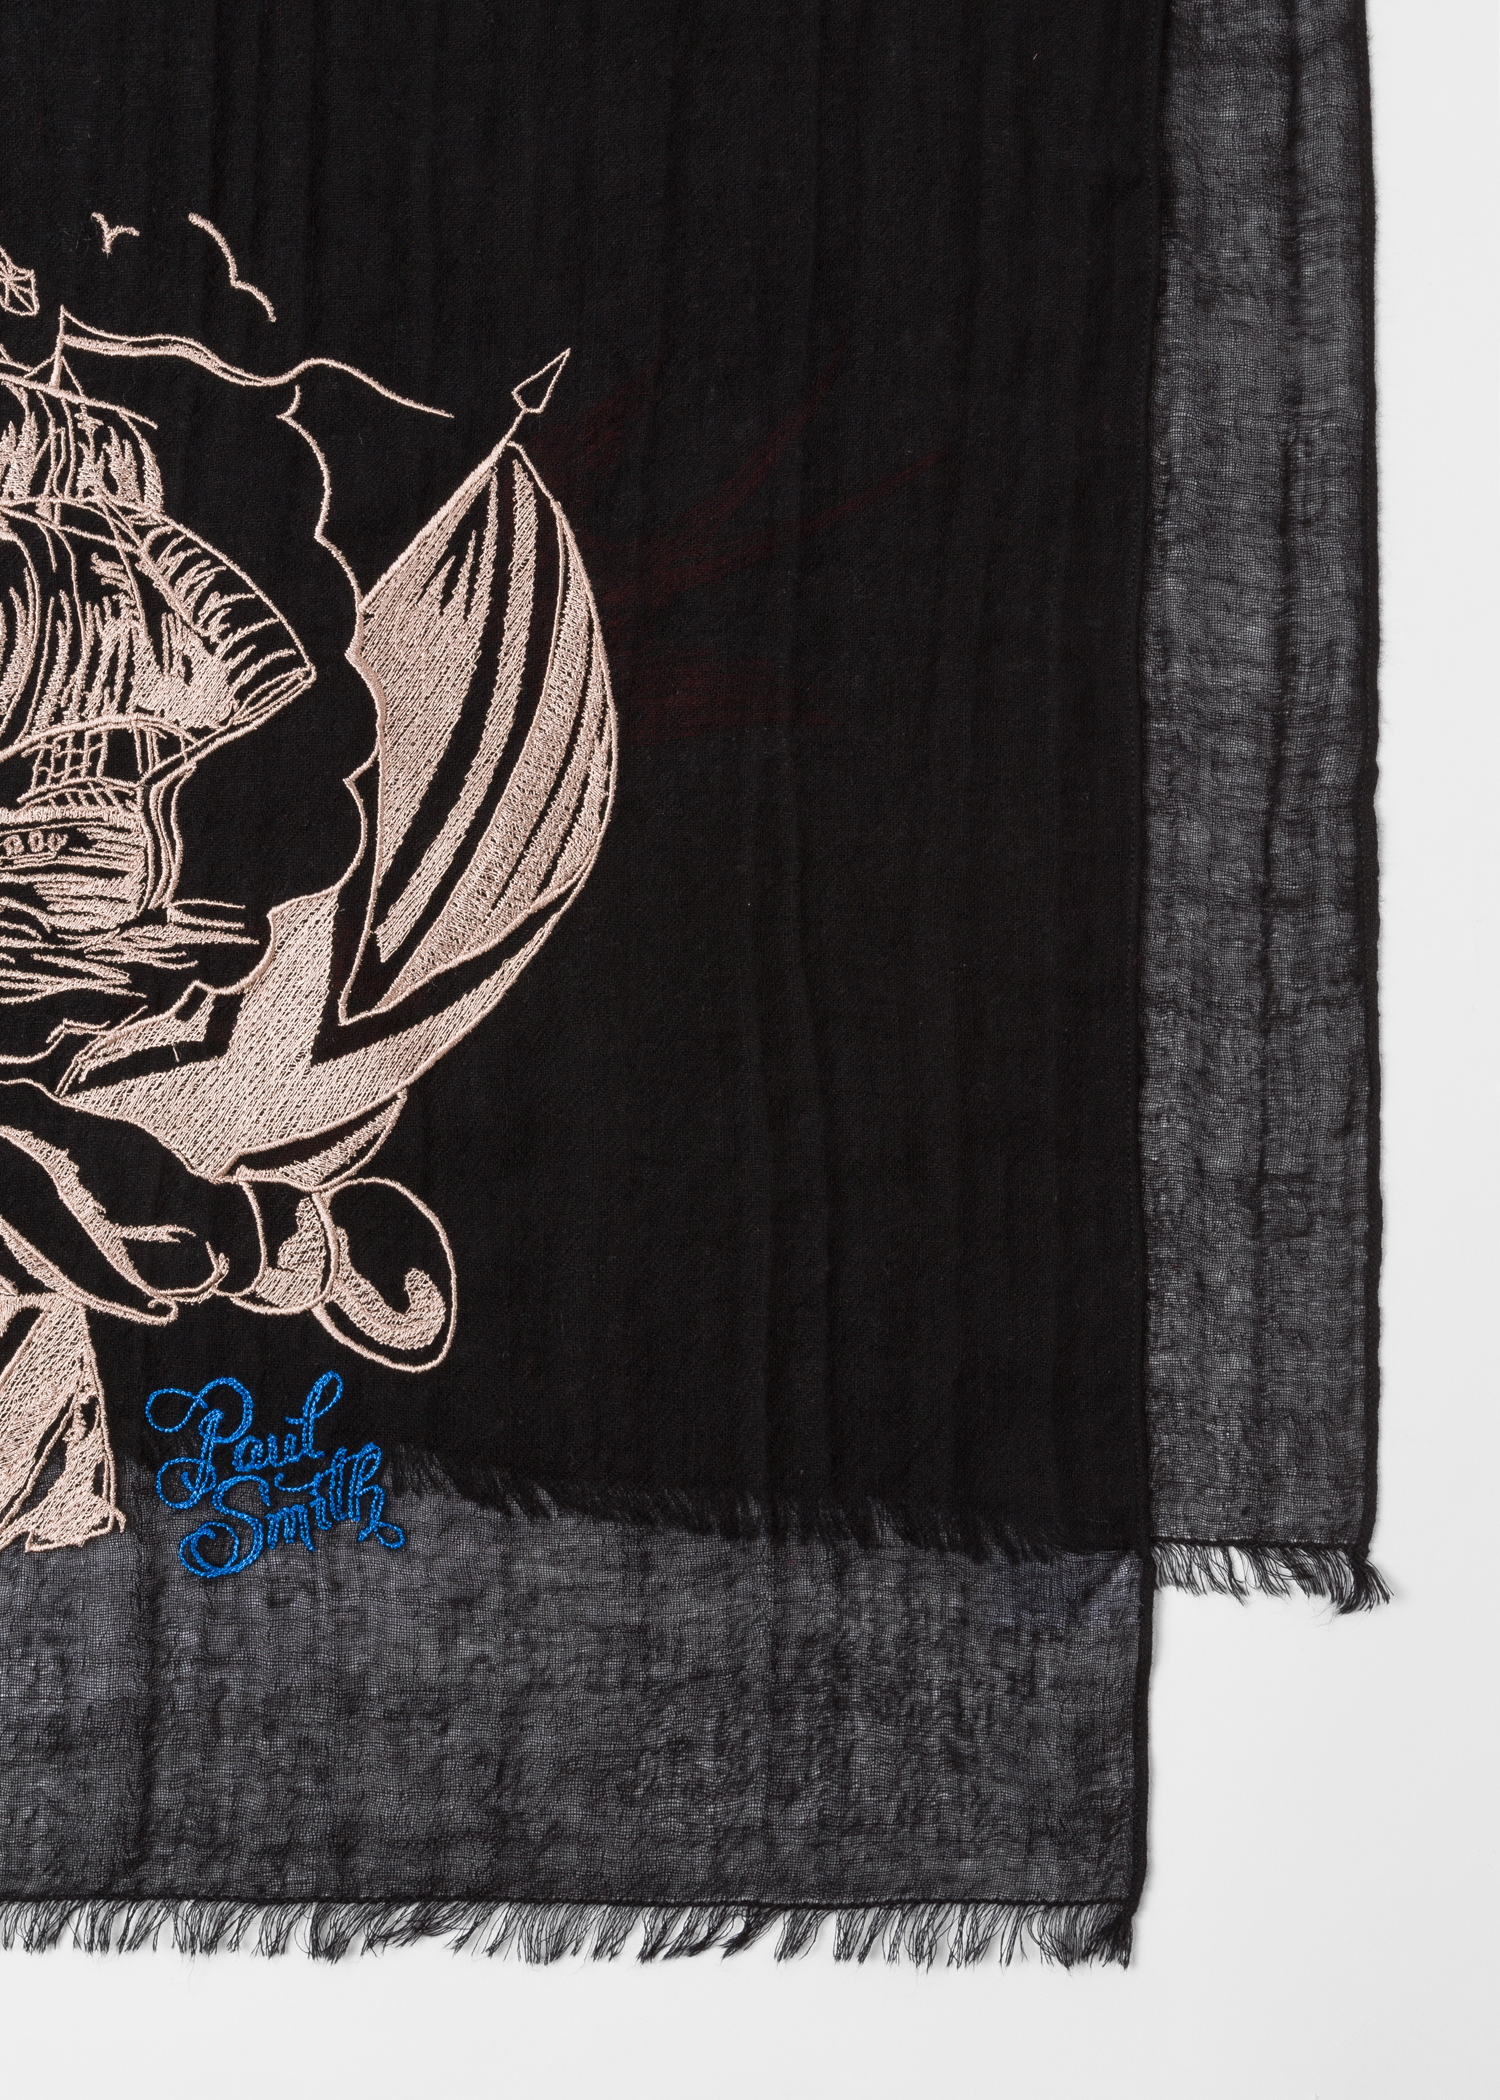 Detailed view - Paul Smith + Mark Mahoney - Men's Embroidered Ship Wool Scarf